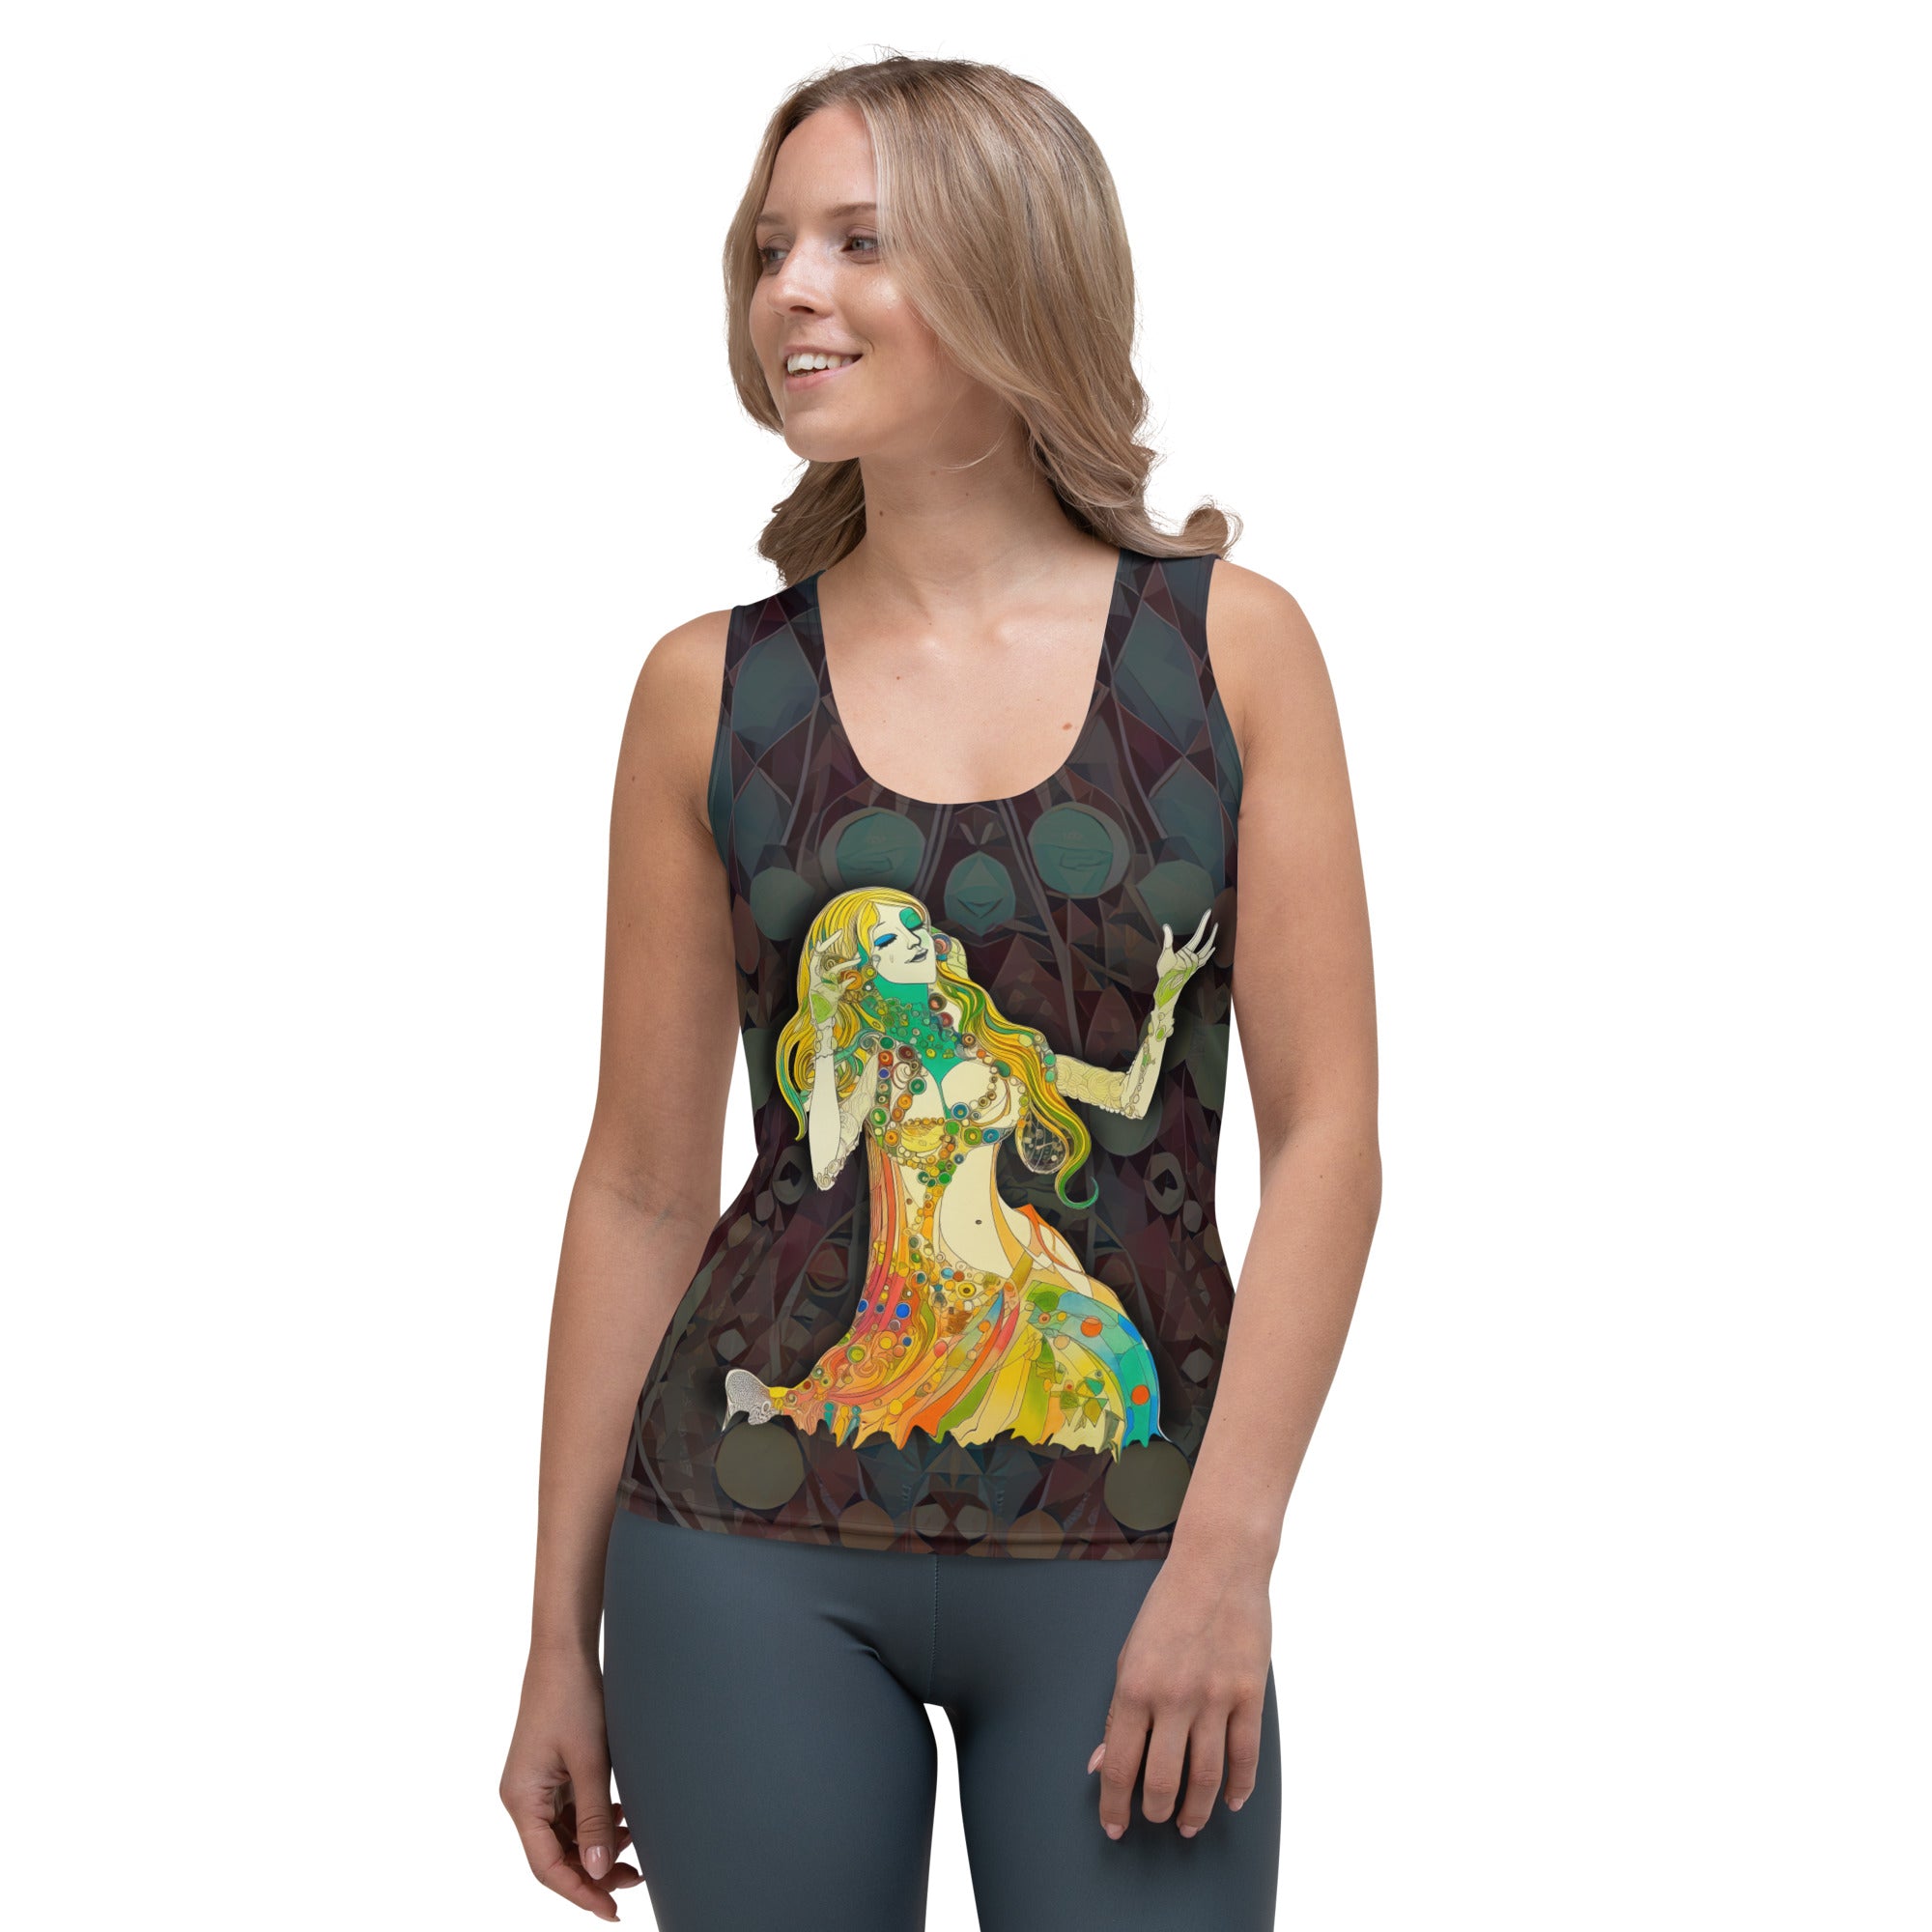 Wildflowers Whimsy Women's Tank Top Front View.